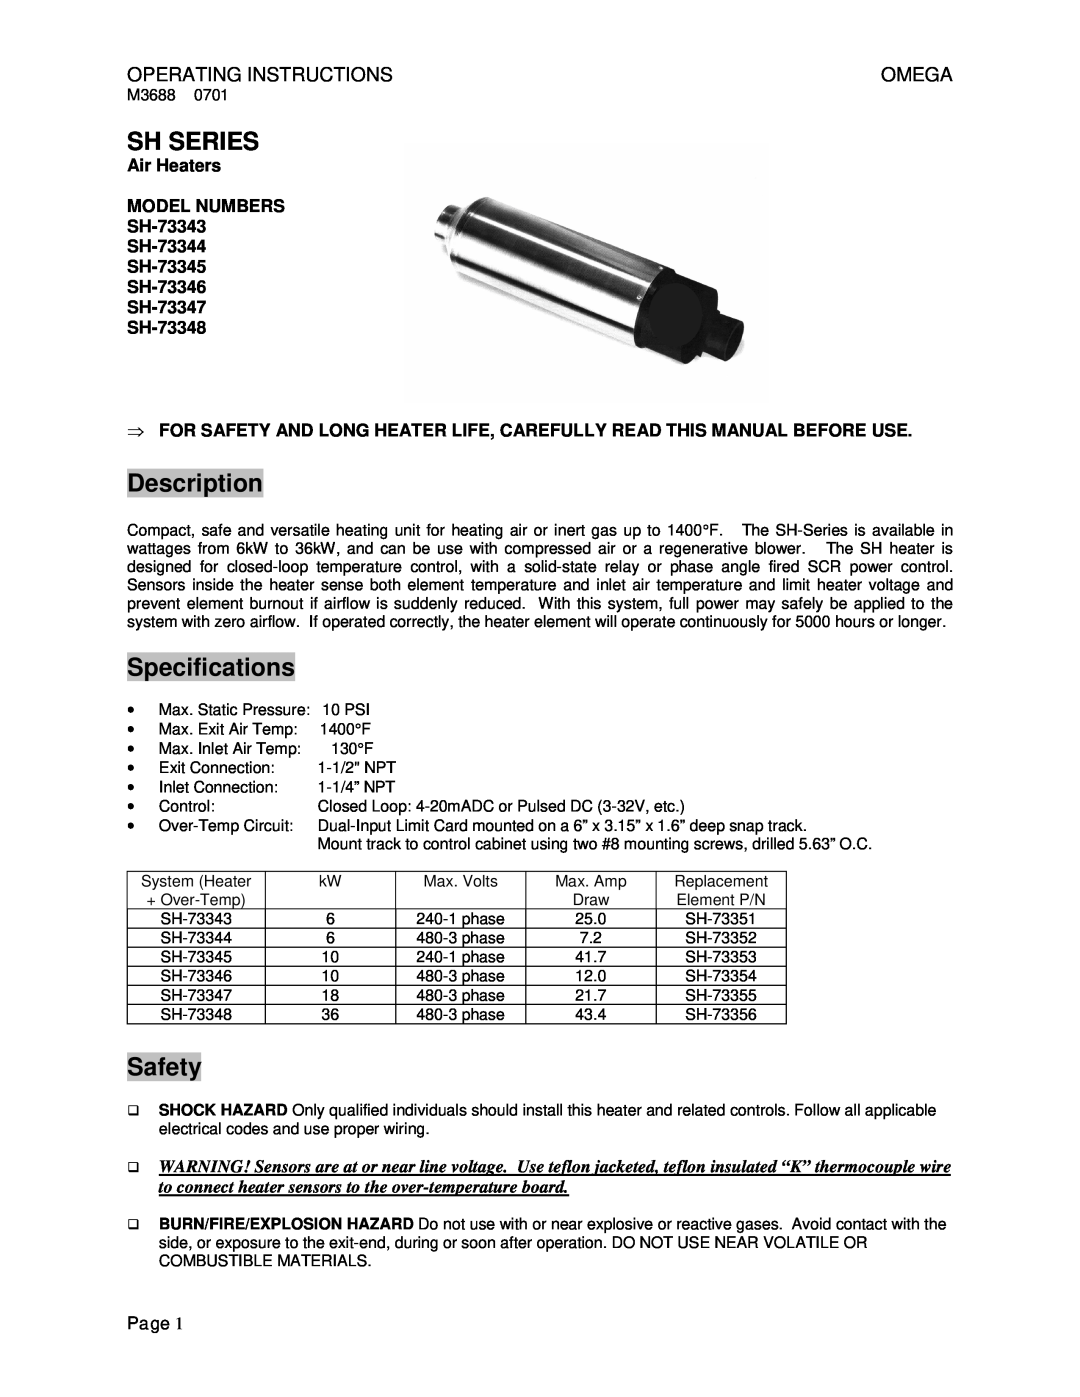 Omega Vehicle Security SH73343 specifications Sh Series, Description, Specifications, Safety, Operating Instructions 